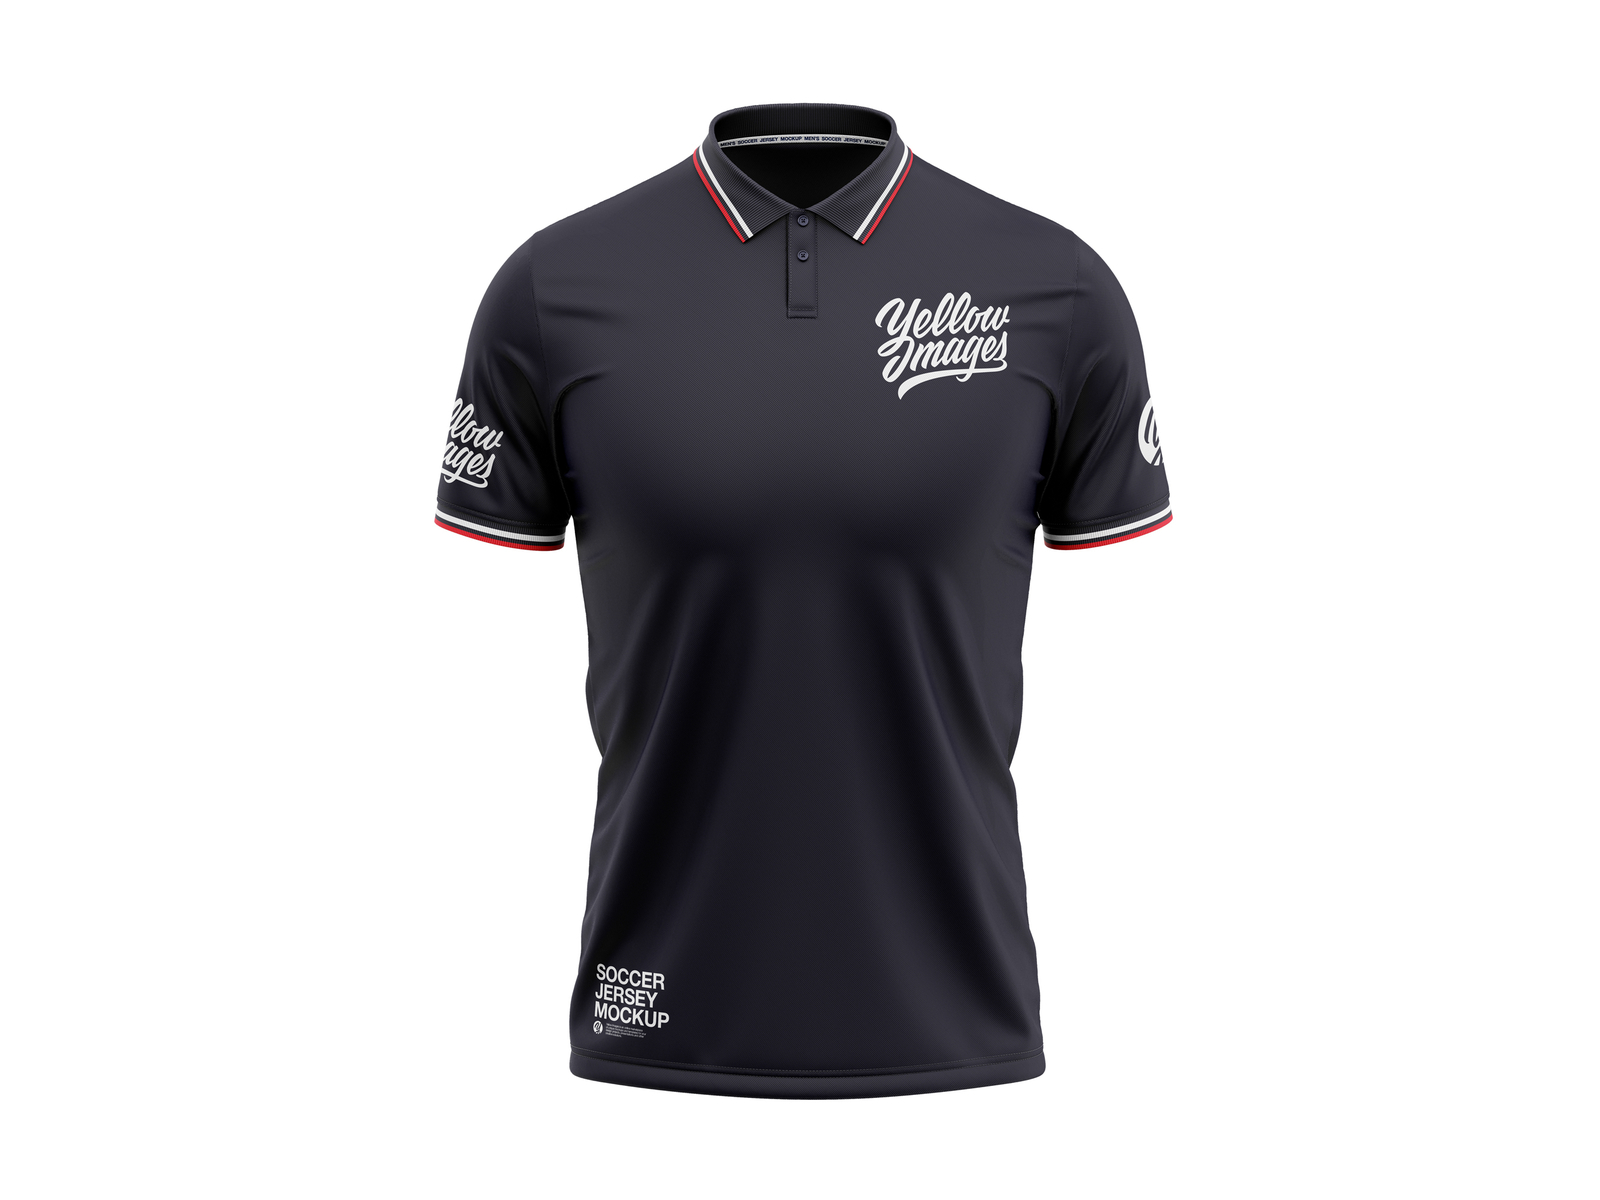 Download Polo Shirt Soccer Jersey Mockup by CG Tailor on Dribbble